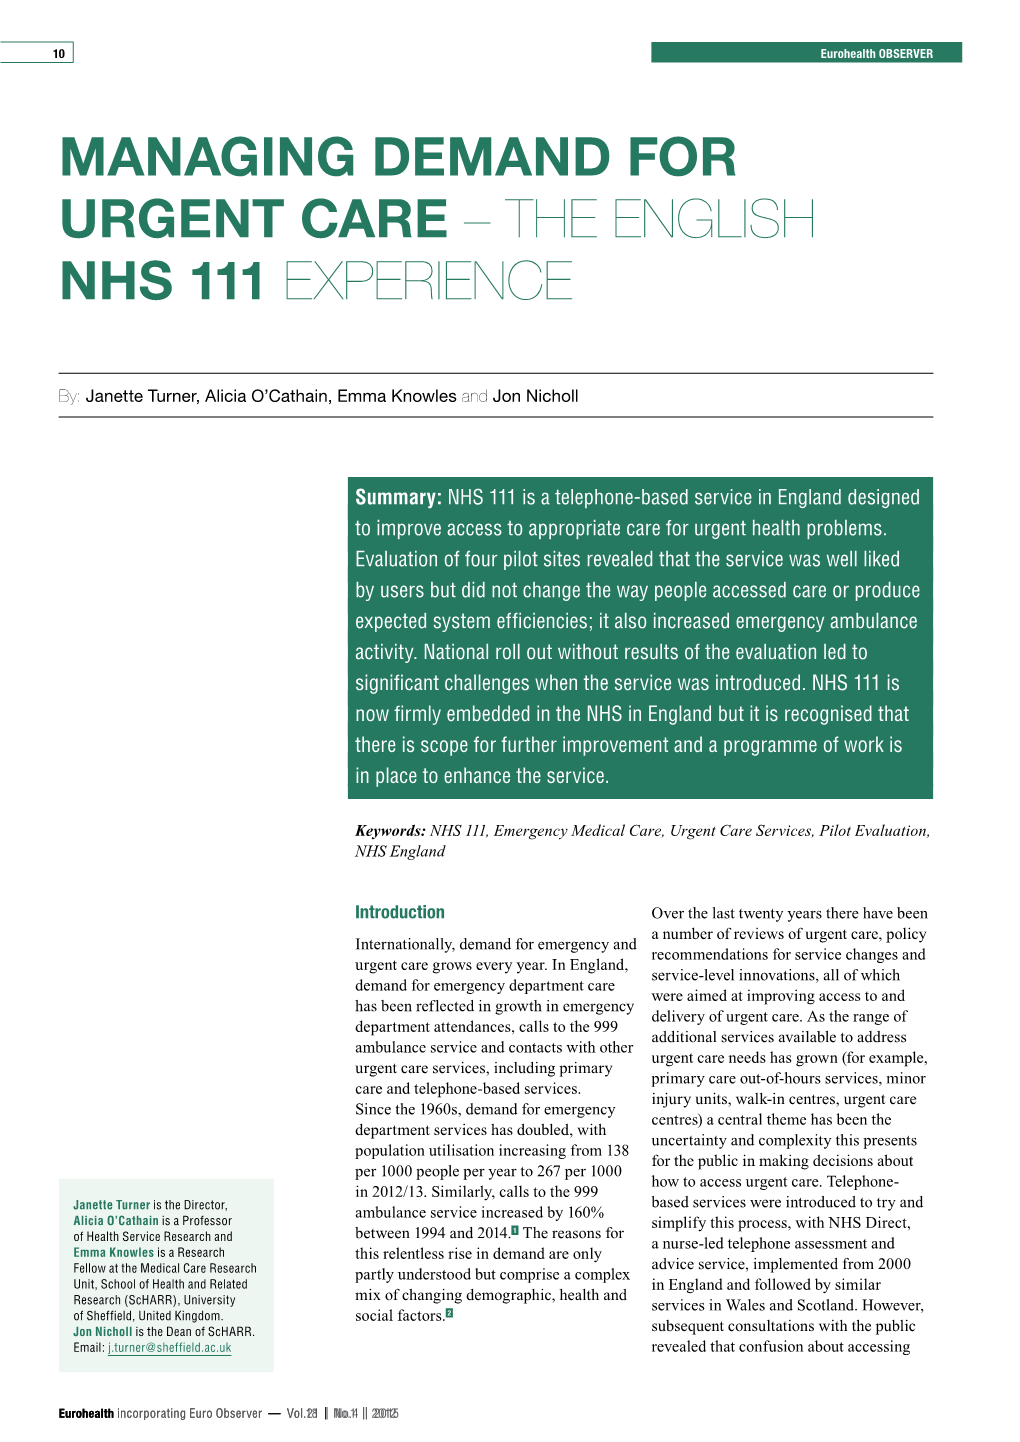 Managing Demand for Urgent Care – the English Nhs 111 Experience